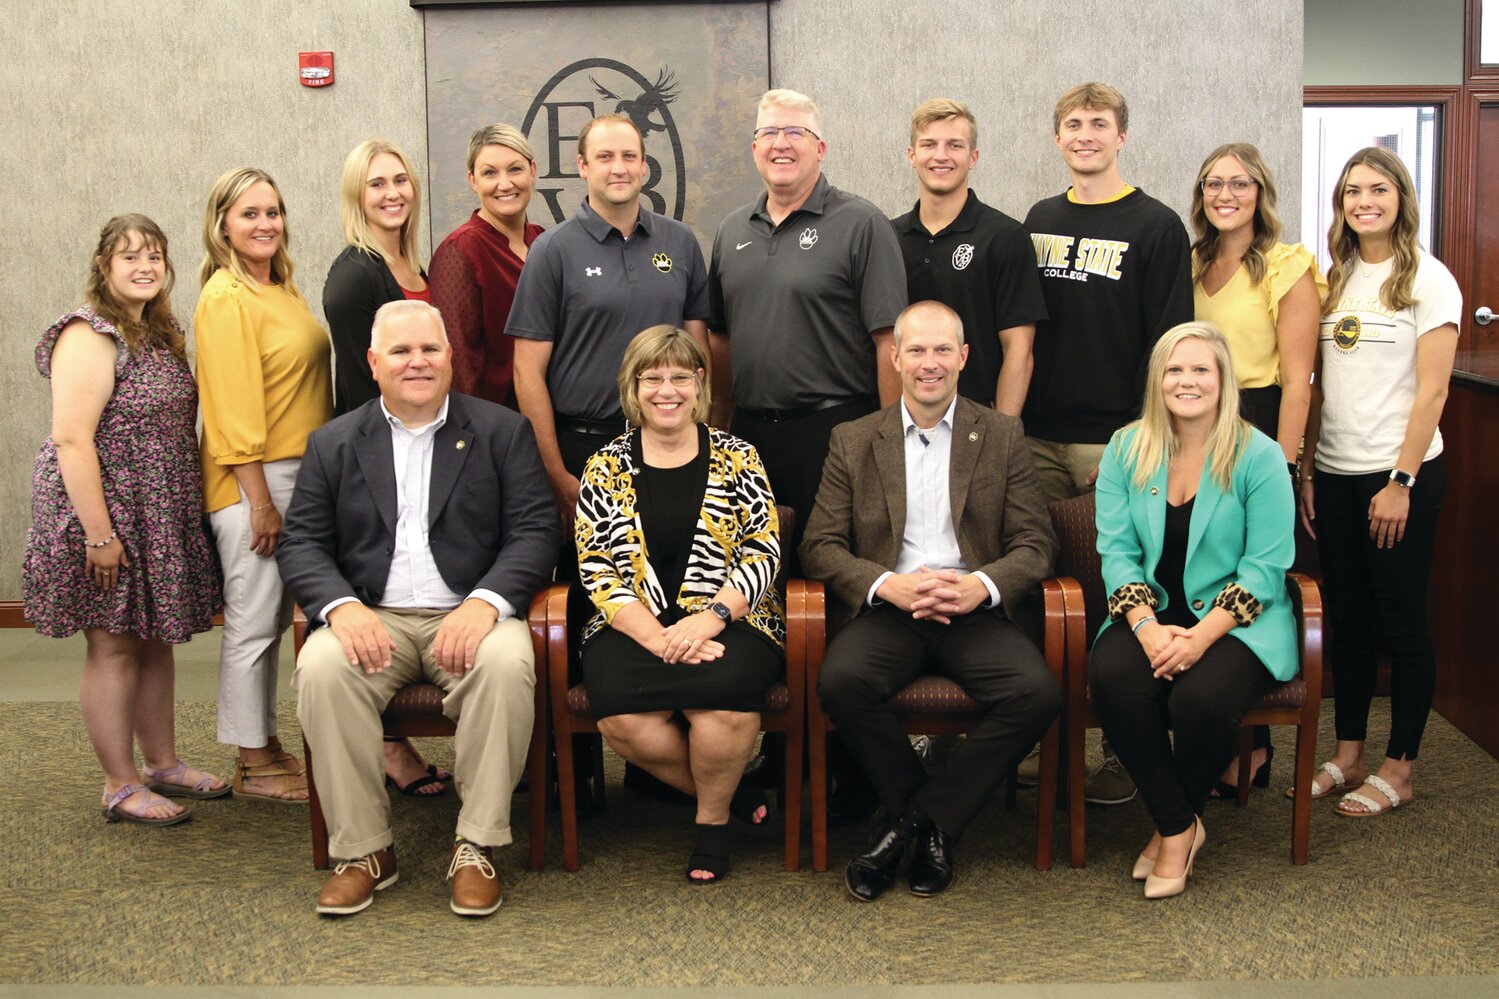 Elkhorn Valley Bank & Trust made a $100,000 to Wayne State’s Athletic and Recreation Complex Renovation and Addition project. Gathering to recognize the donation were: Wayne State representatives (front) Kevin Armstrong, Dr. Marysz Rames, Mike Powicki and Megan Finn. Wayne State alumni employed at Elkhorn Valley’s Wayne branch include (back) Brianna Campbell, Jamie Dunn, Ria Pedersen, Amanda Prince, Brandon Mainquist, Rod Hunke, Blake Bartos, Elijah Pfeifer, Megan Anderson and Gina Wragge. Not pictured from Elkhorn Valley Bank are Lincoln Havranek and Bri Robins.